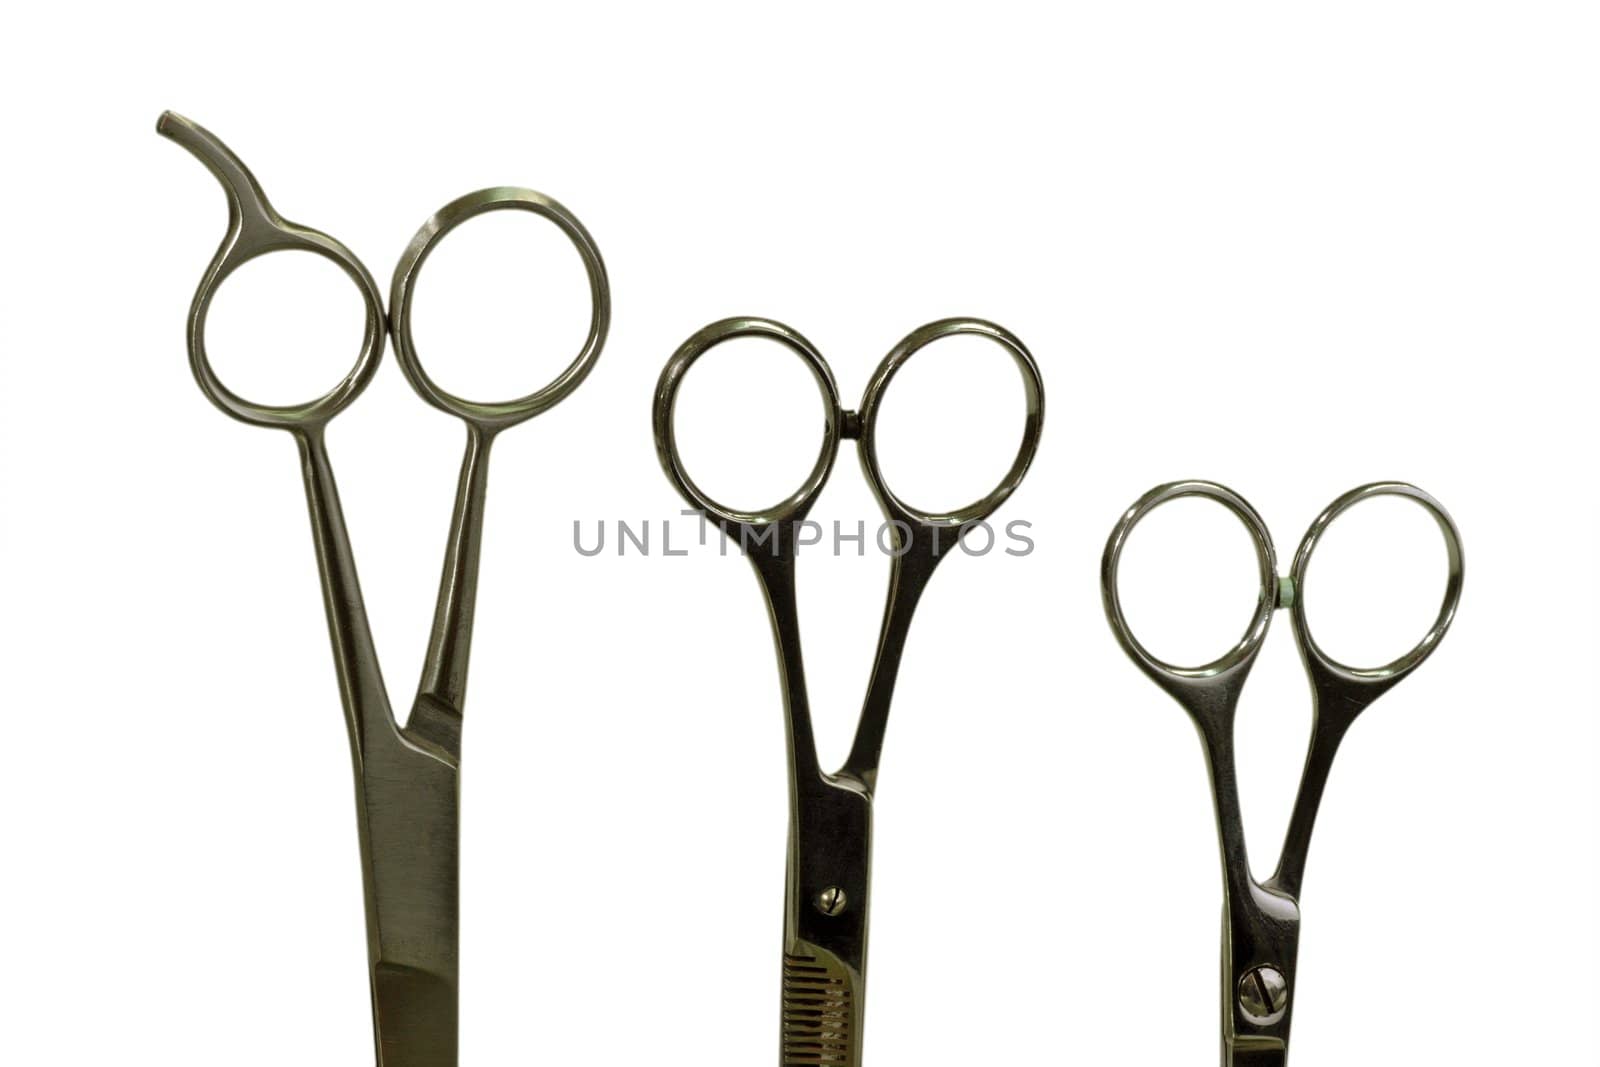 Haircutting scissors on bright background